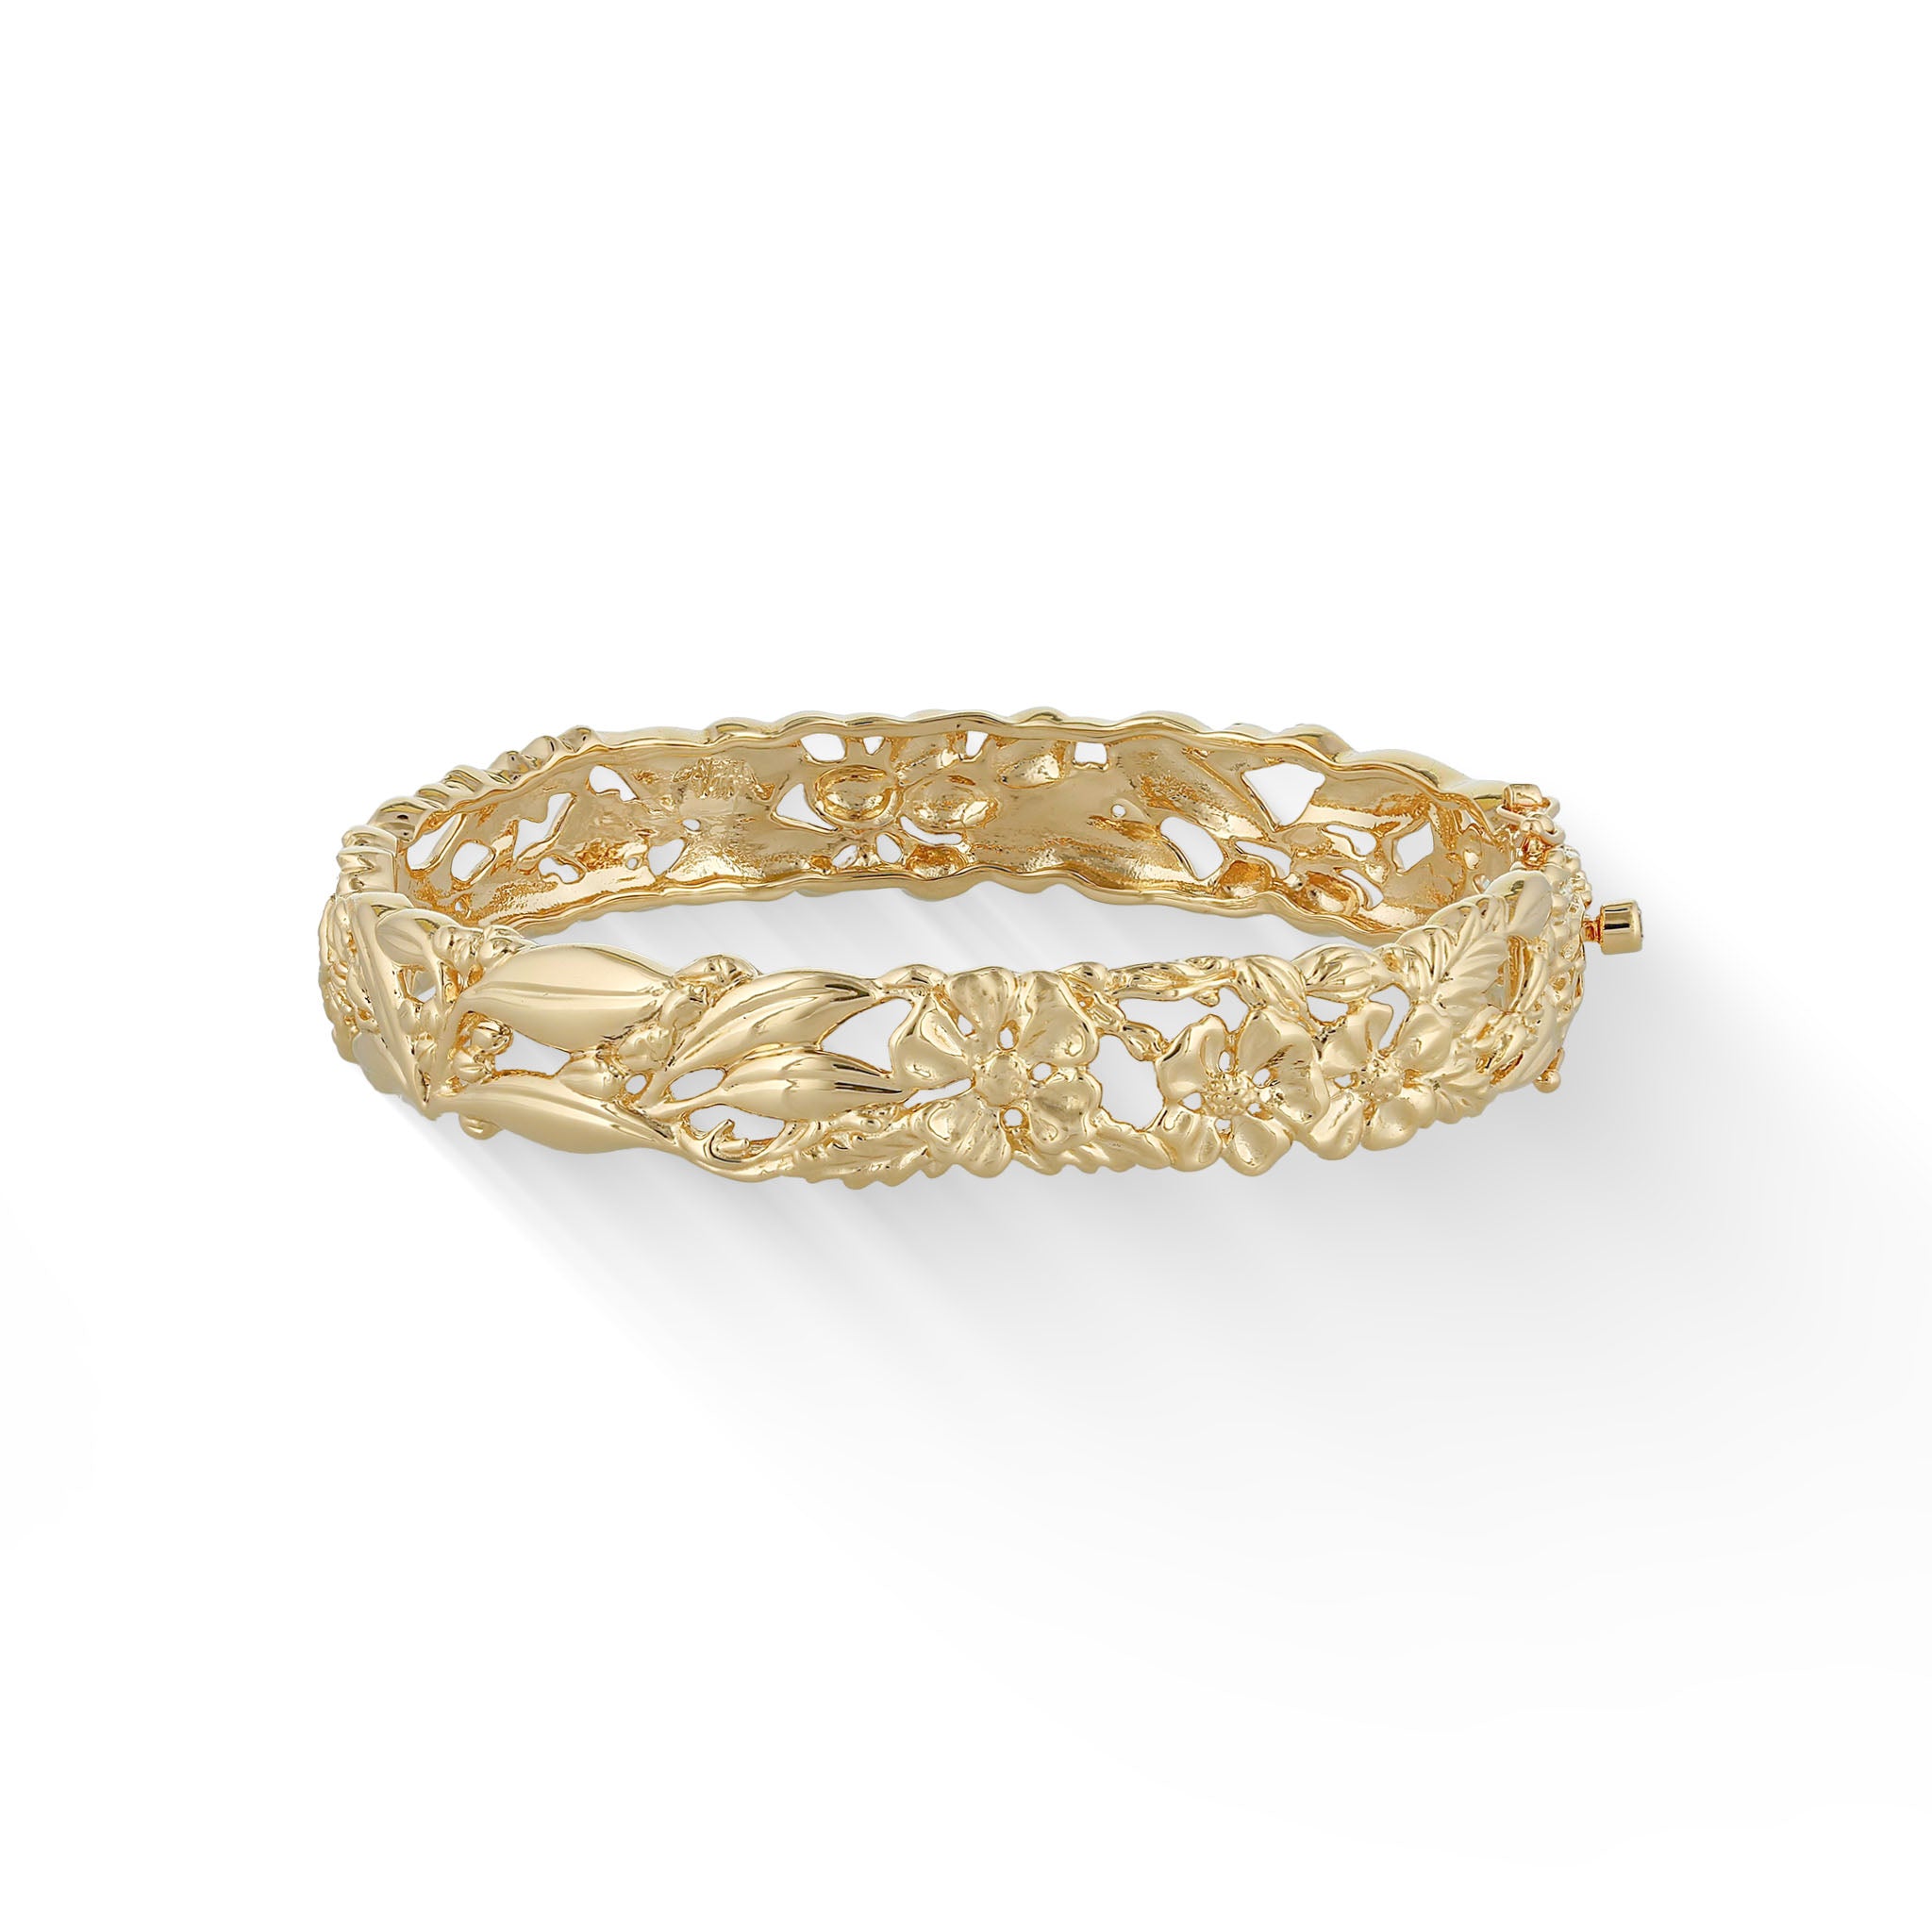 14K Gold] 6mm Open Bangle Bracelet/ Barrel *Made-to-order*TRDSP – Maxi  Hawaiian Jewelry マキシ ハワイアンジュエリー ハワイ本店